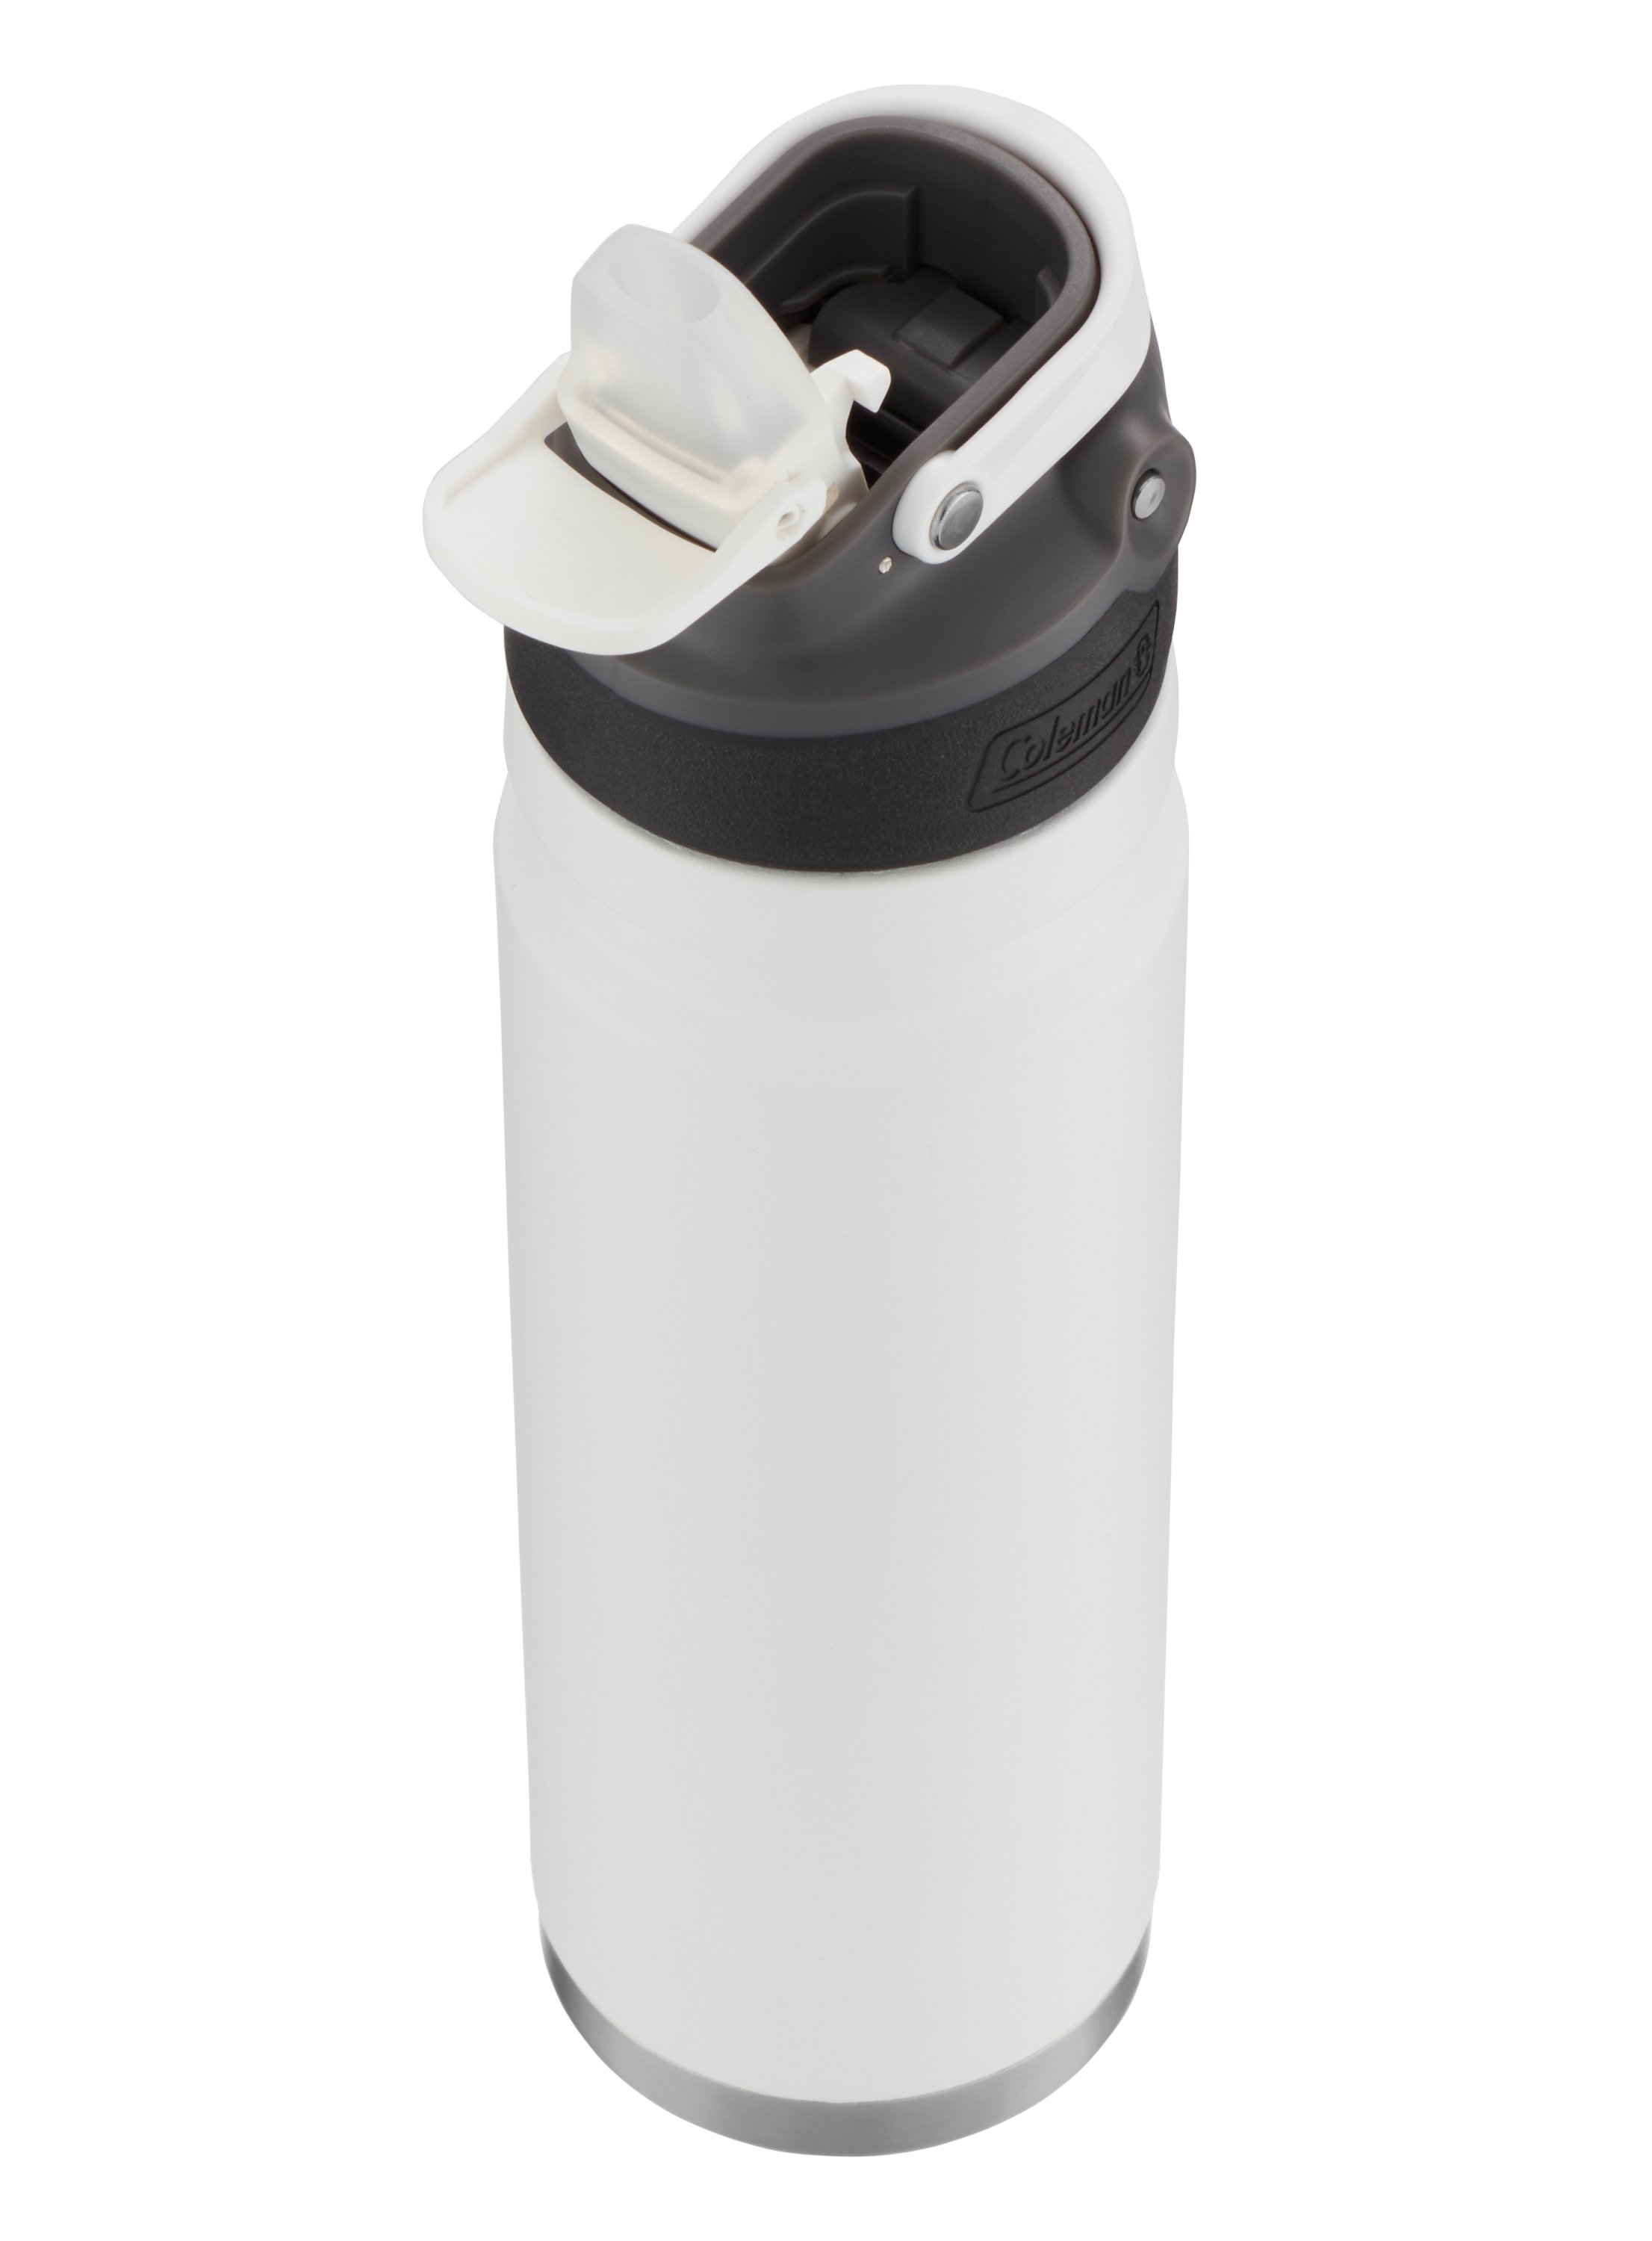 Coleman Switch Autospout Stainless Steel Insulated Water Bottle, 24 oz., White Cloud - image 3 of 9